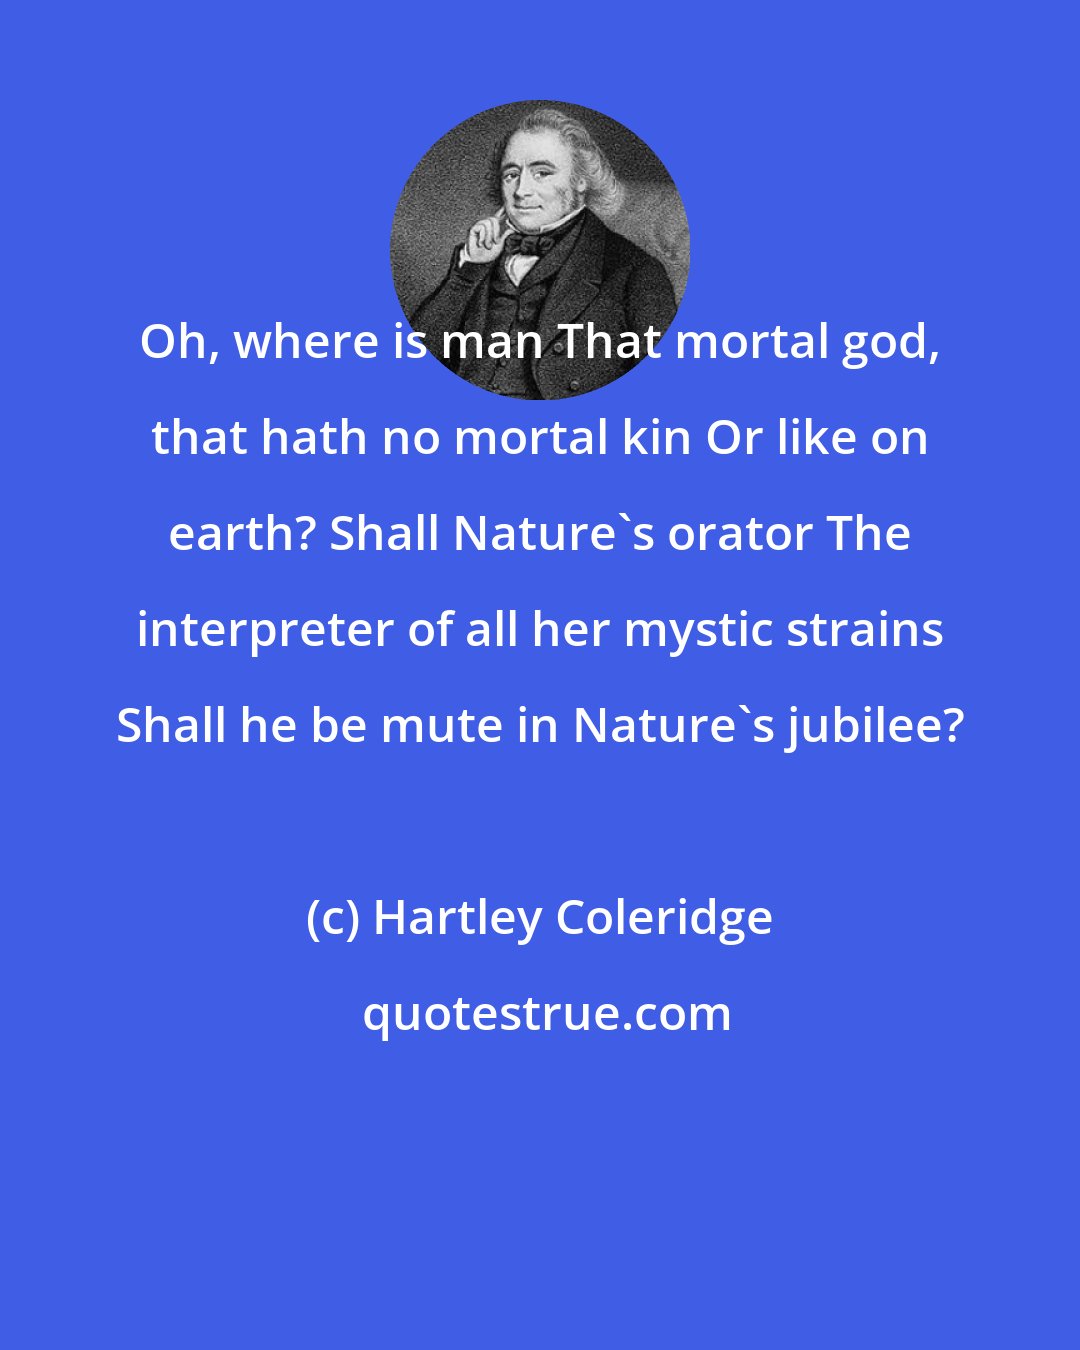 Hartley Coleridge: Oh, where is man That mortal god, that hath no mortal kin Or like on earth? Shall Nature's orator The interpreter of all her mystic strains Shall he be mute in Nature's jubilee?